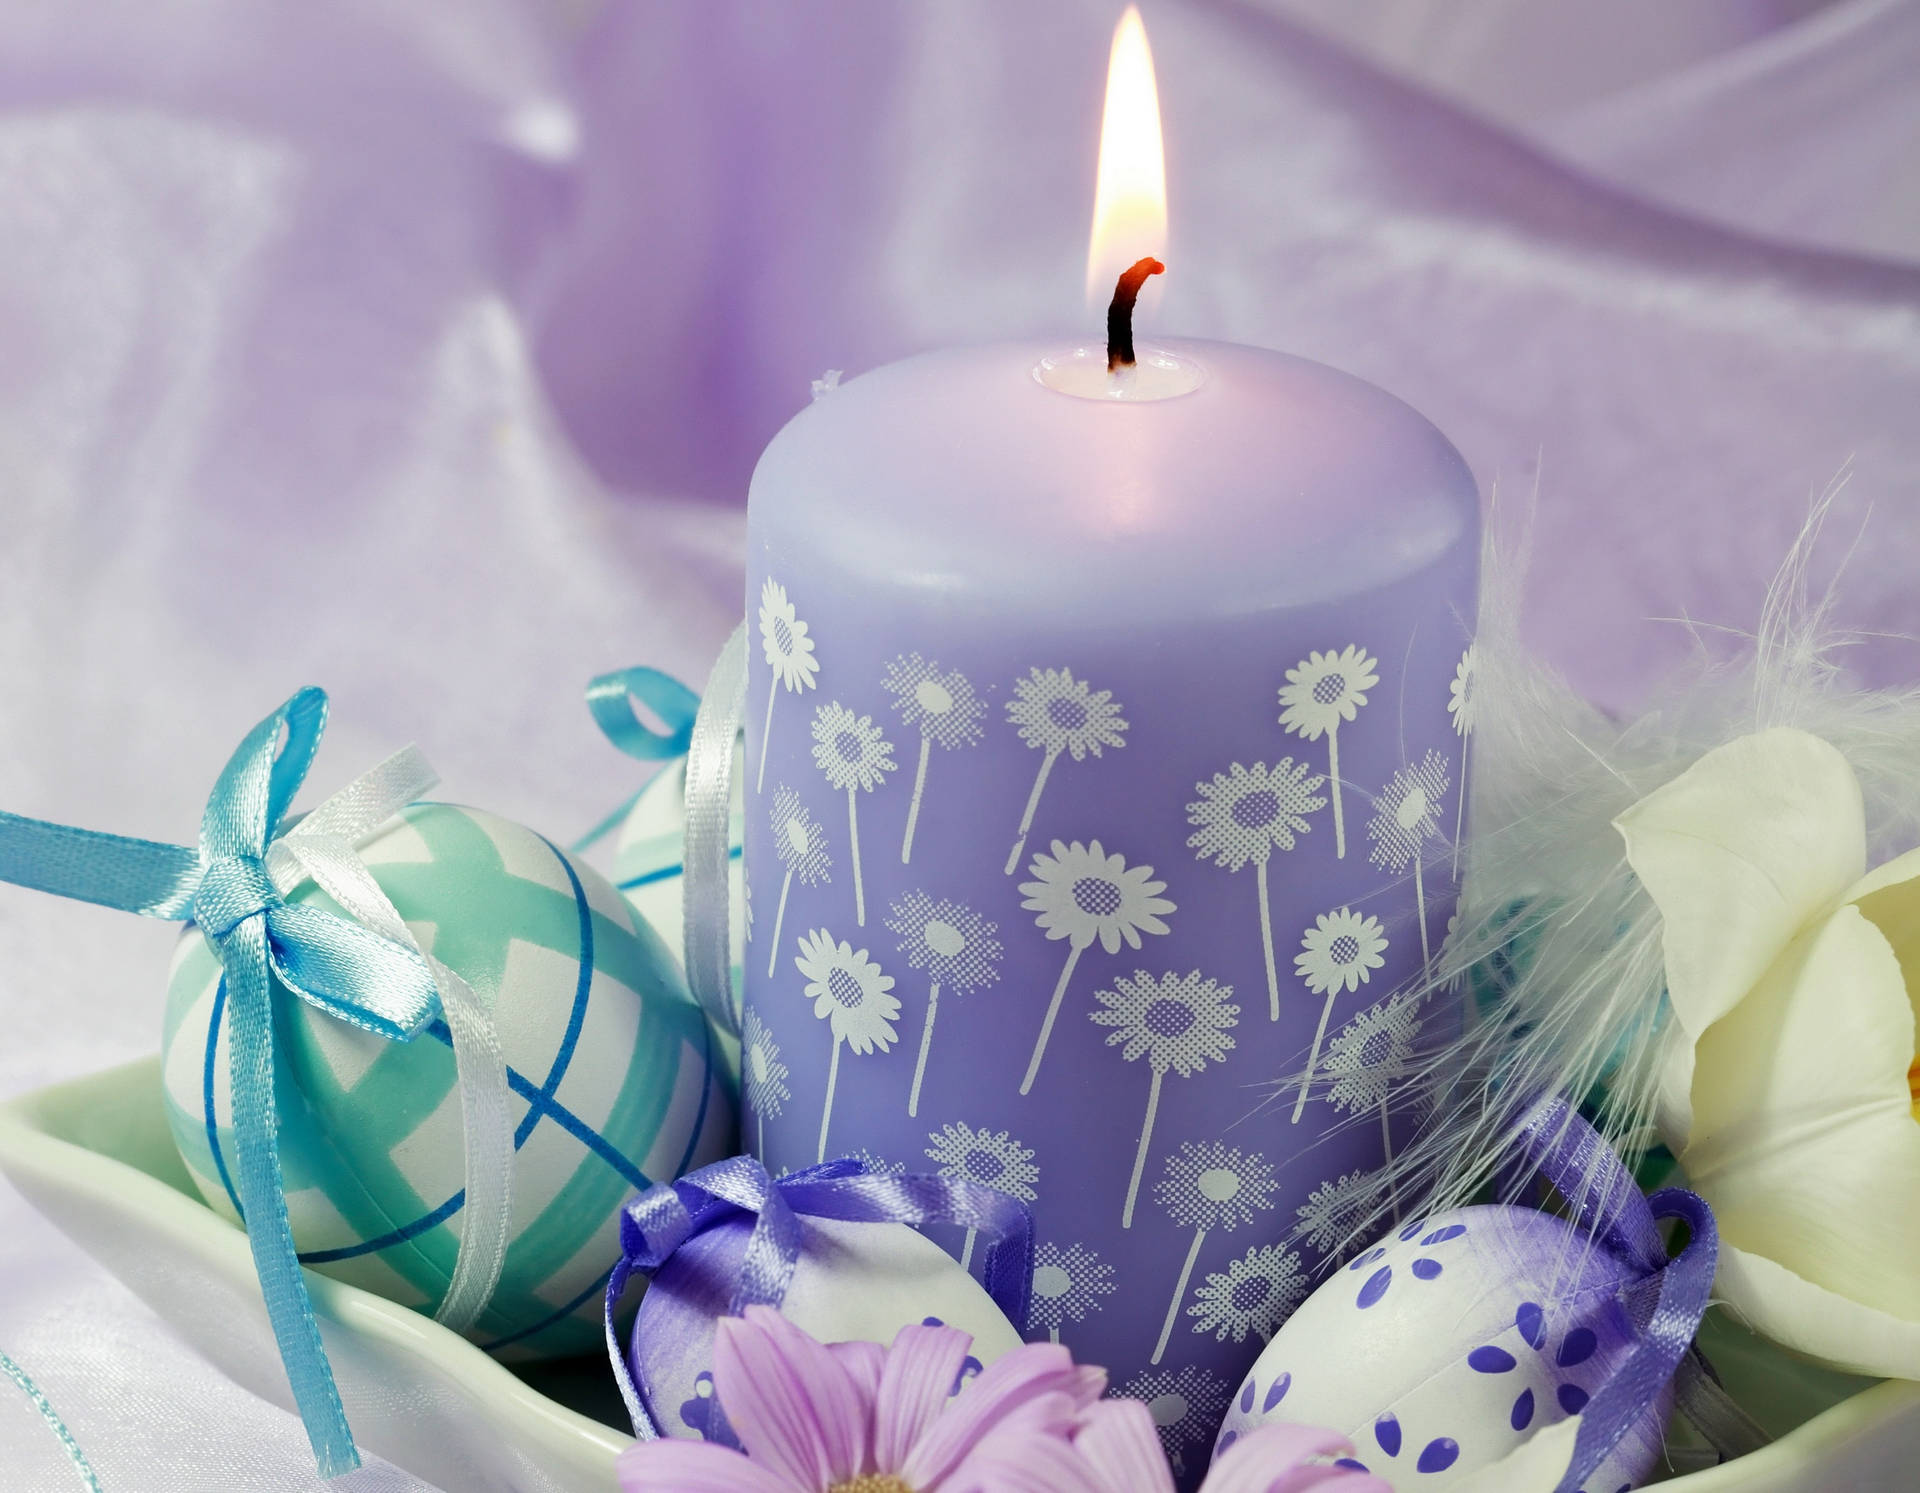 Remember The Reason For This Season This Easter With The Peaceful And Calming Glow Of A Candle. Background